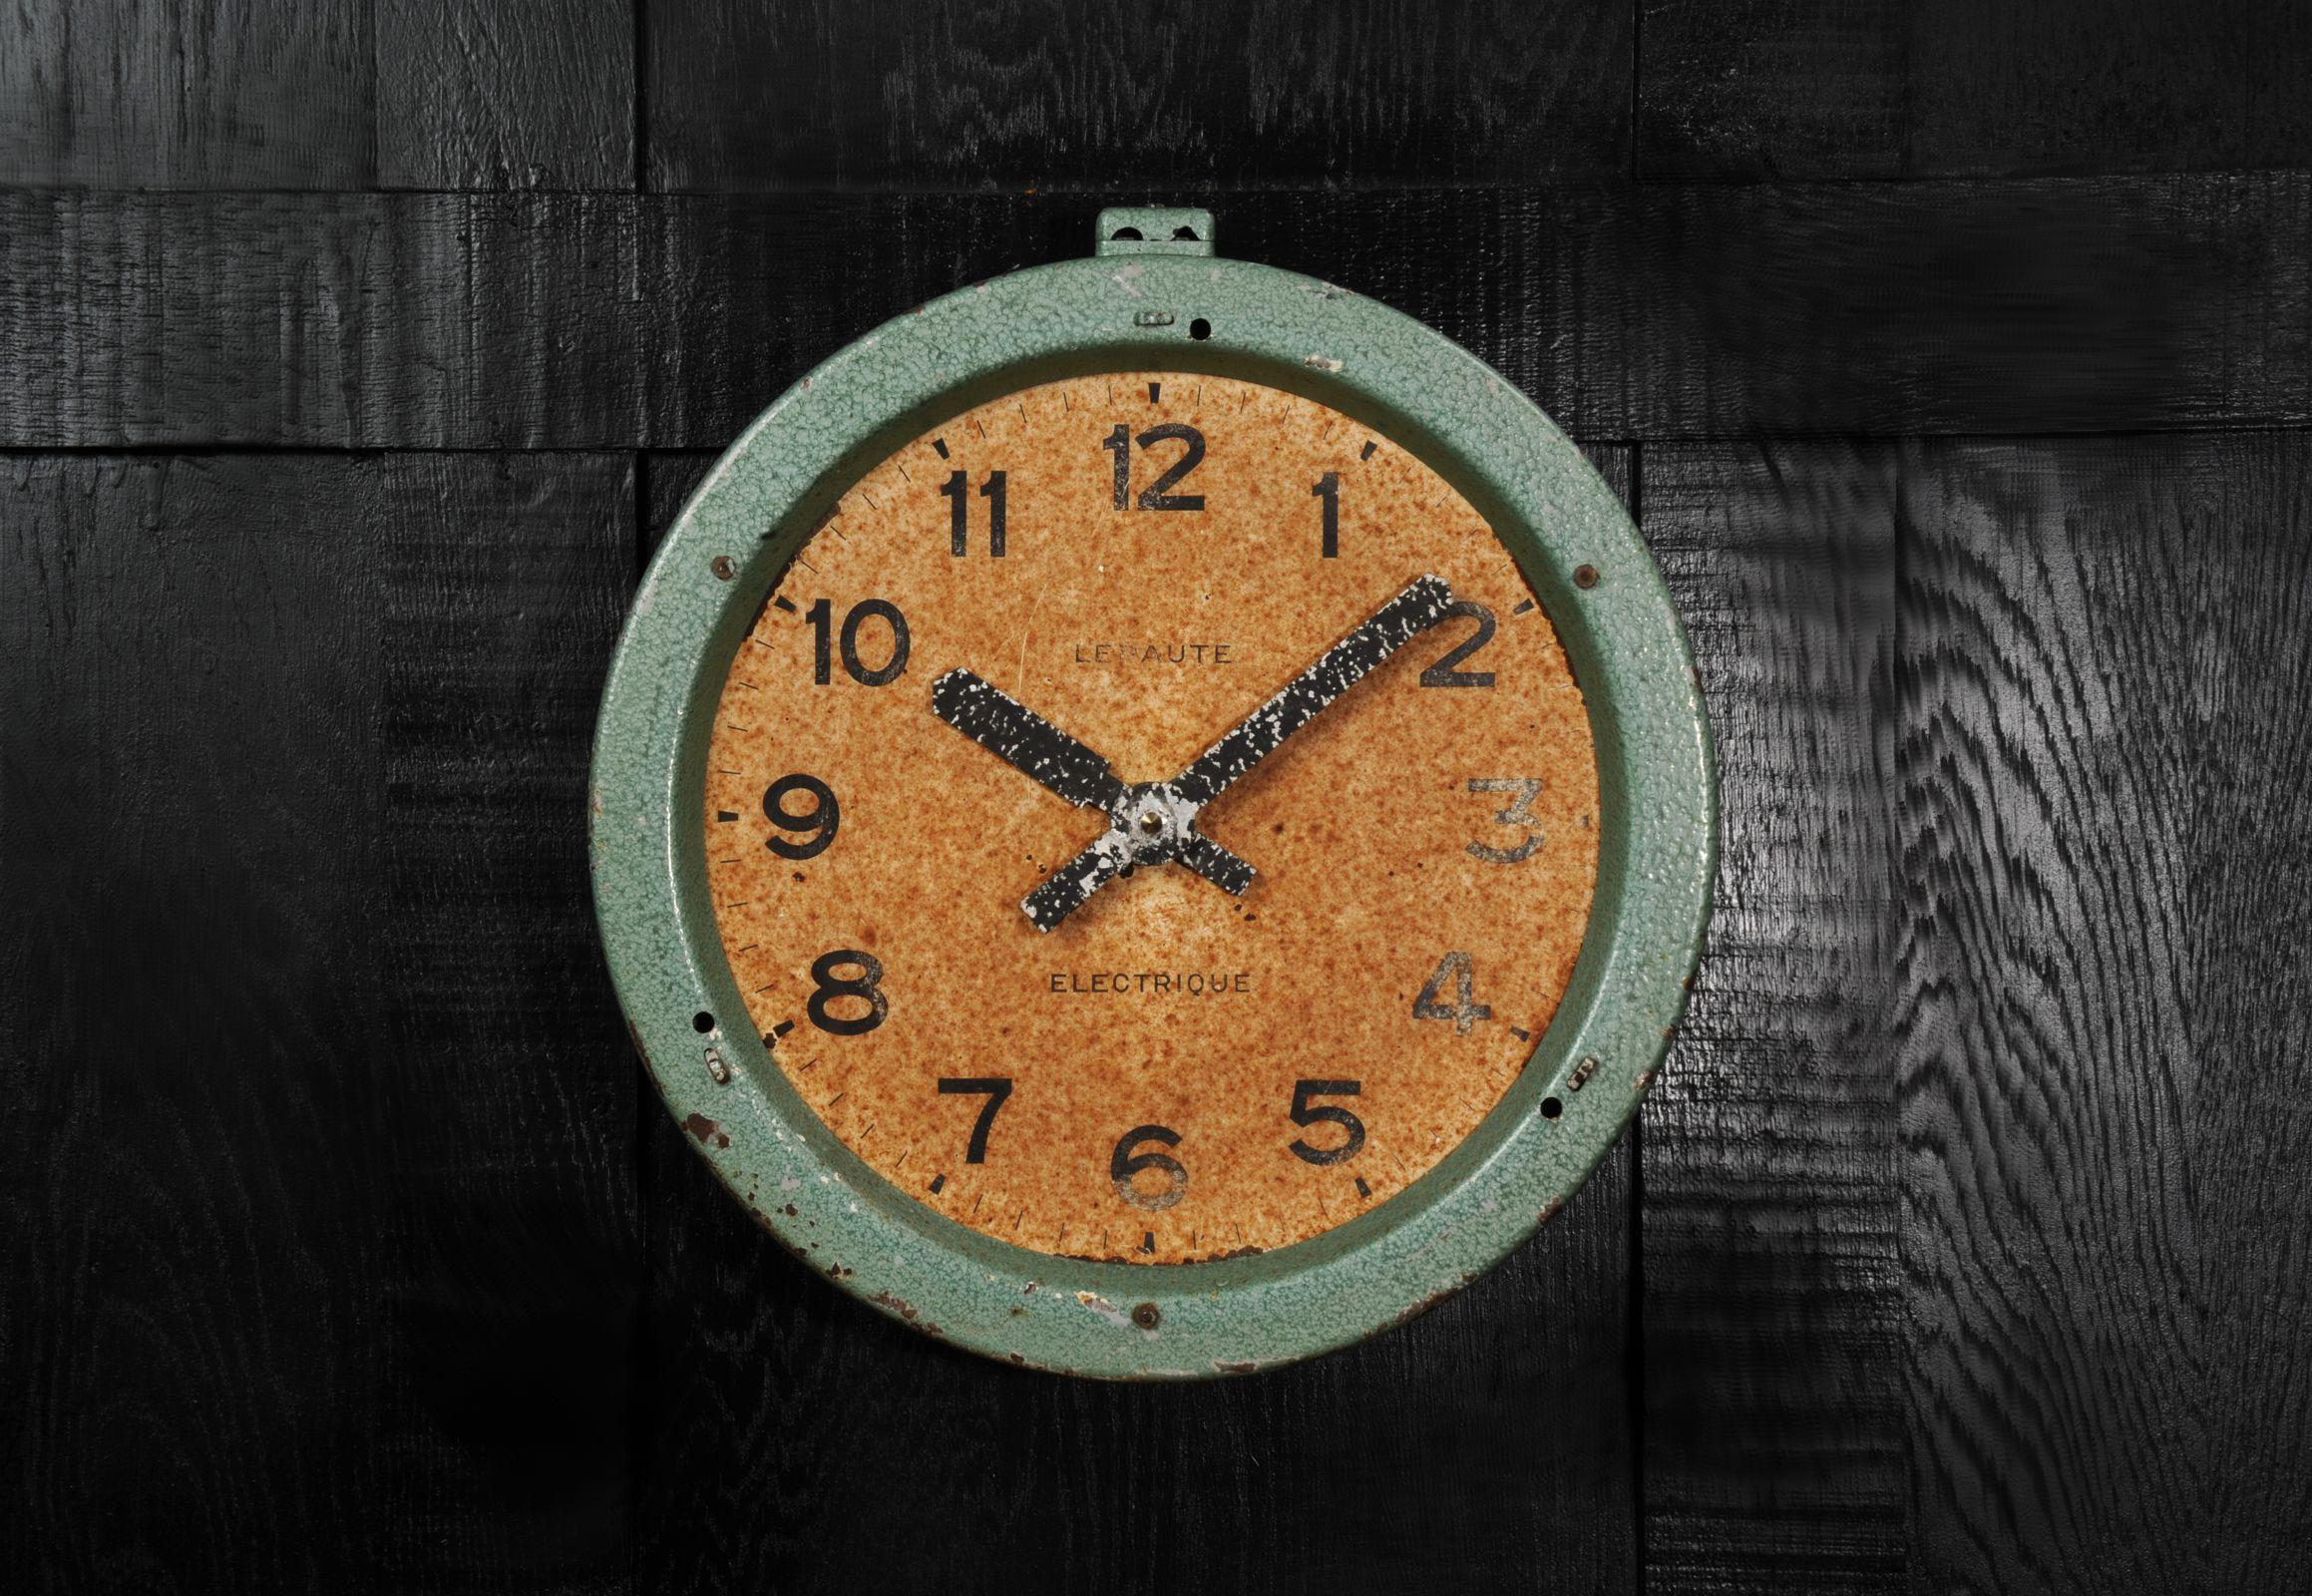 A stunning vintage French industrial clock by the famed company of Henri Lepaute. Found abandoned in a French industrial building by our buyer, the battered green enamel case with dial pockmarked with rust, encompassing the despair and decline of a